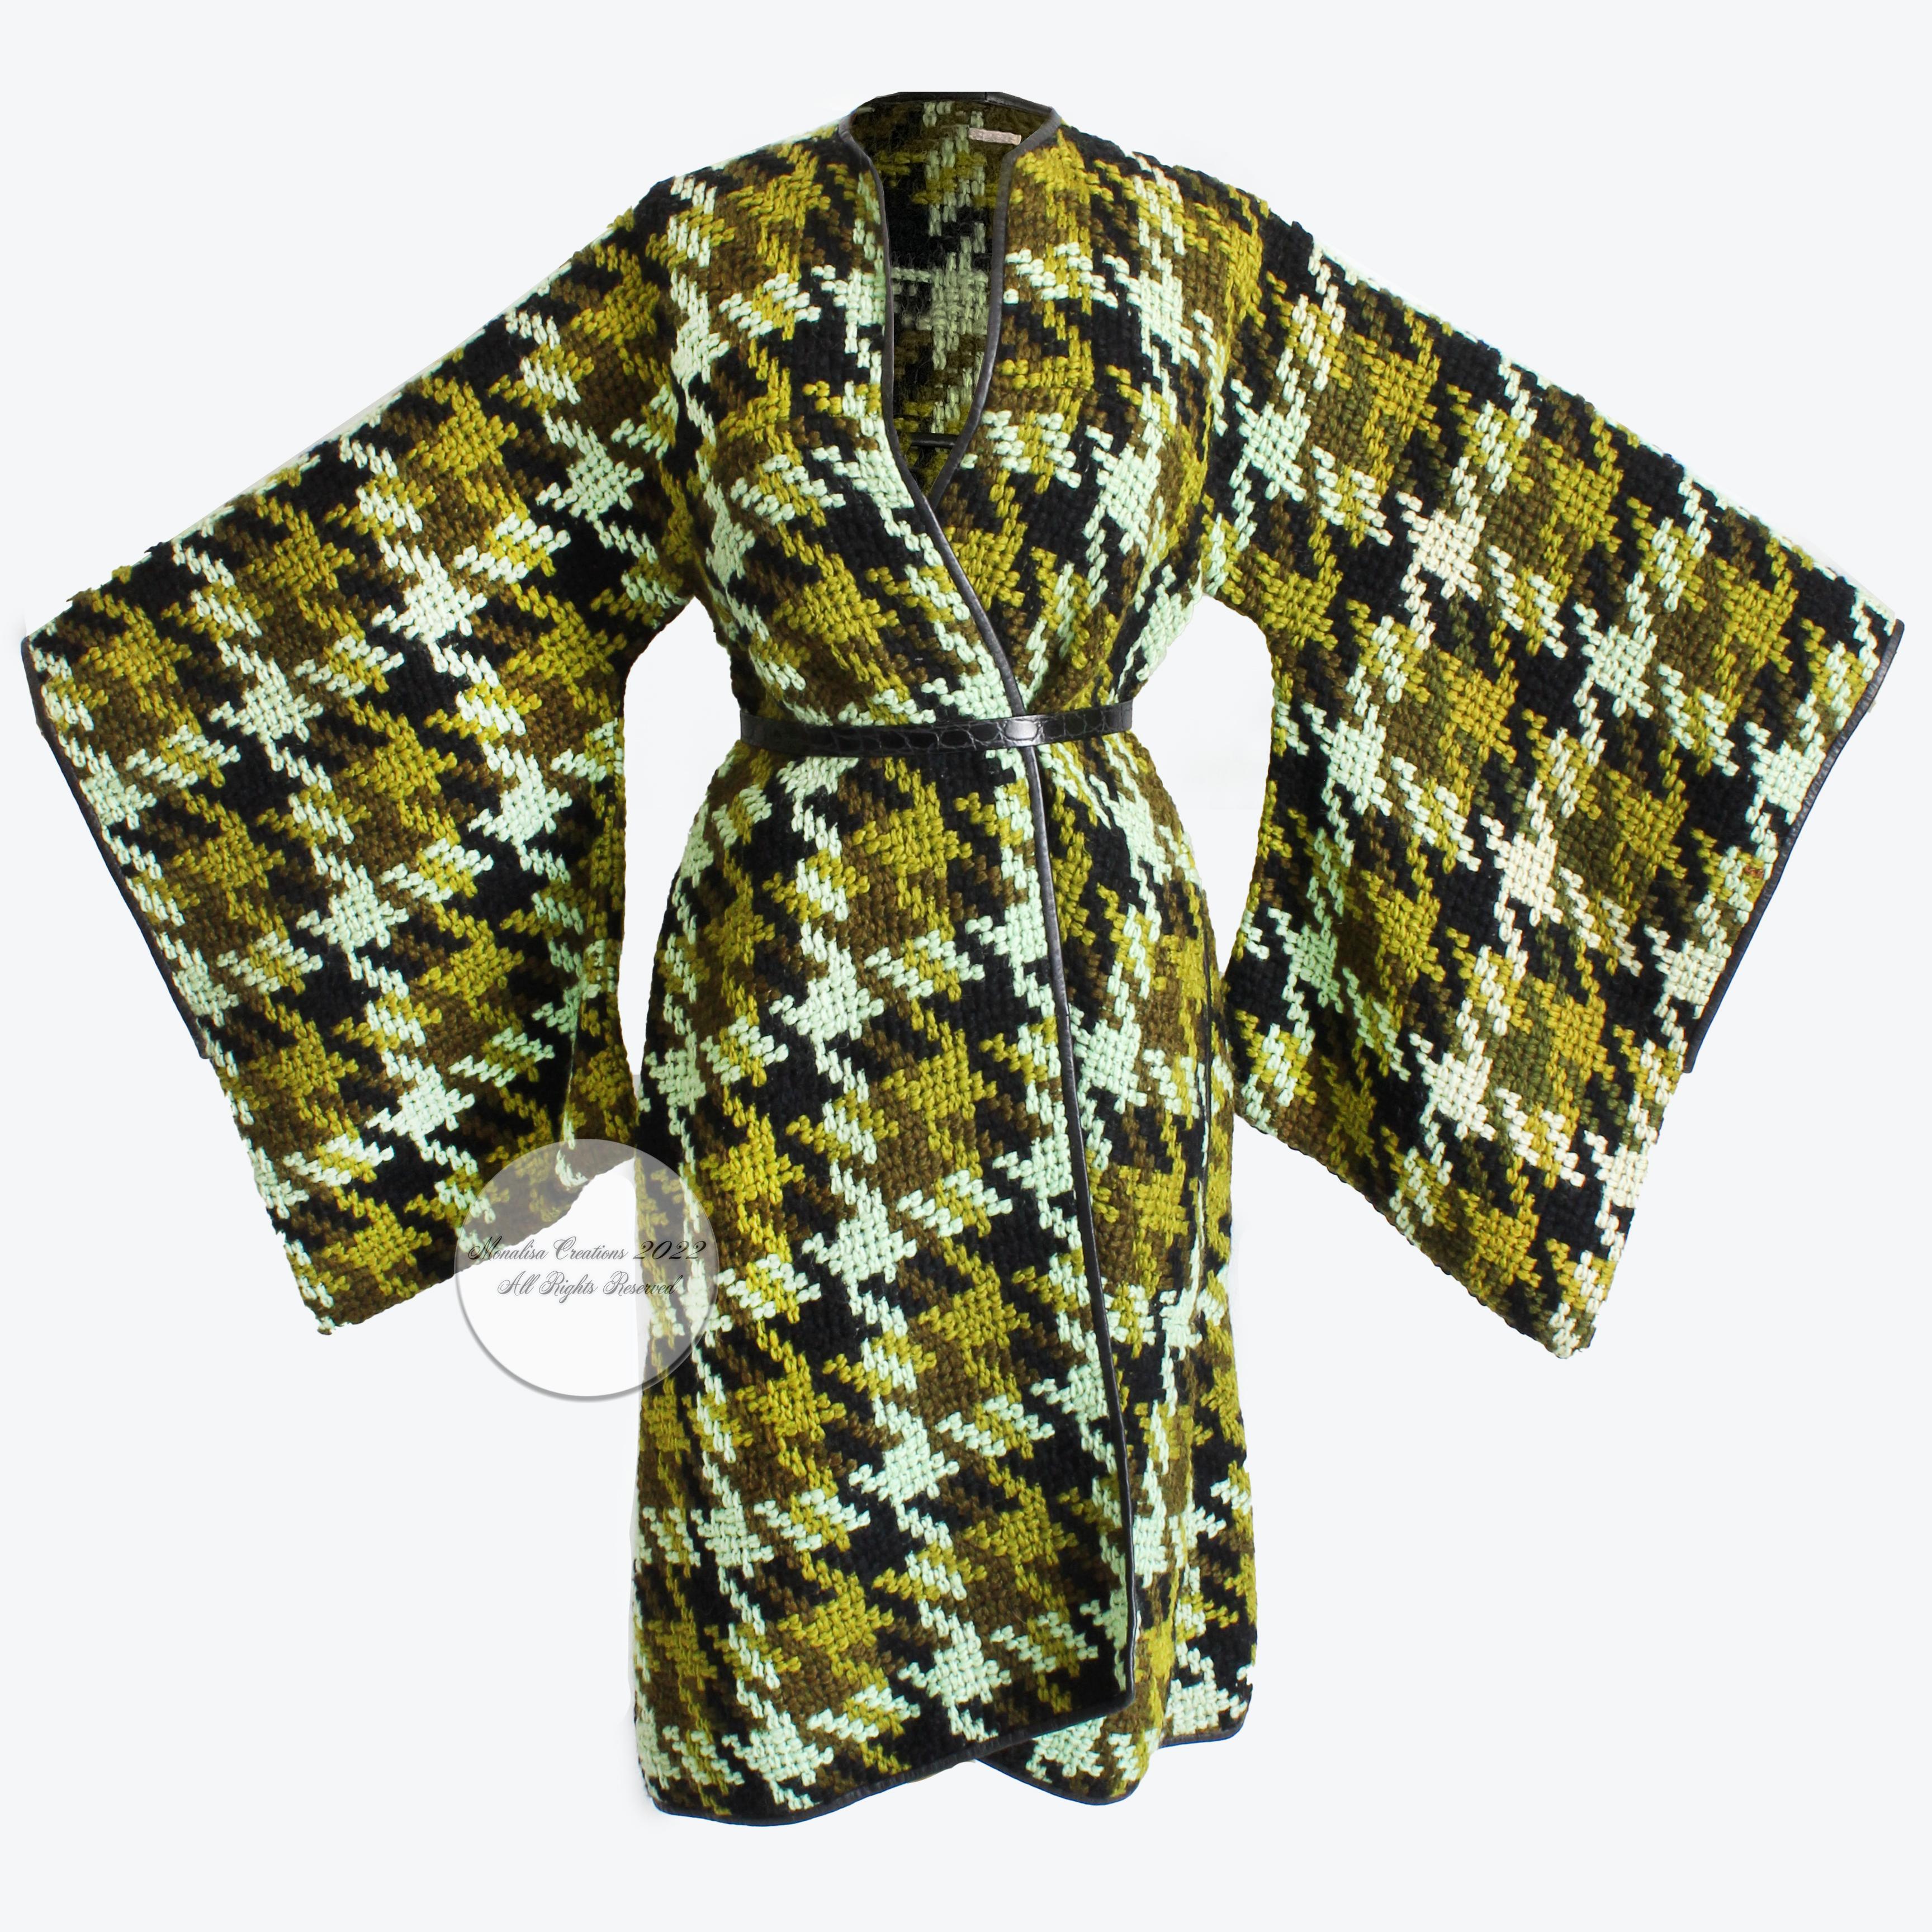 Incredibly rare and uniquely gorgeous vintage Bonnie Cashin for Sills coat with exaggerated trailing sleeves, likely made in the late 60s.  Made from a supple mohair and wool boucle knit, the oversized houndstooth pattern features several shades of